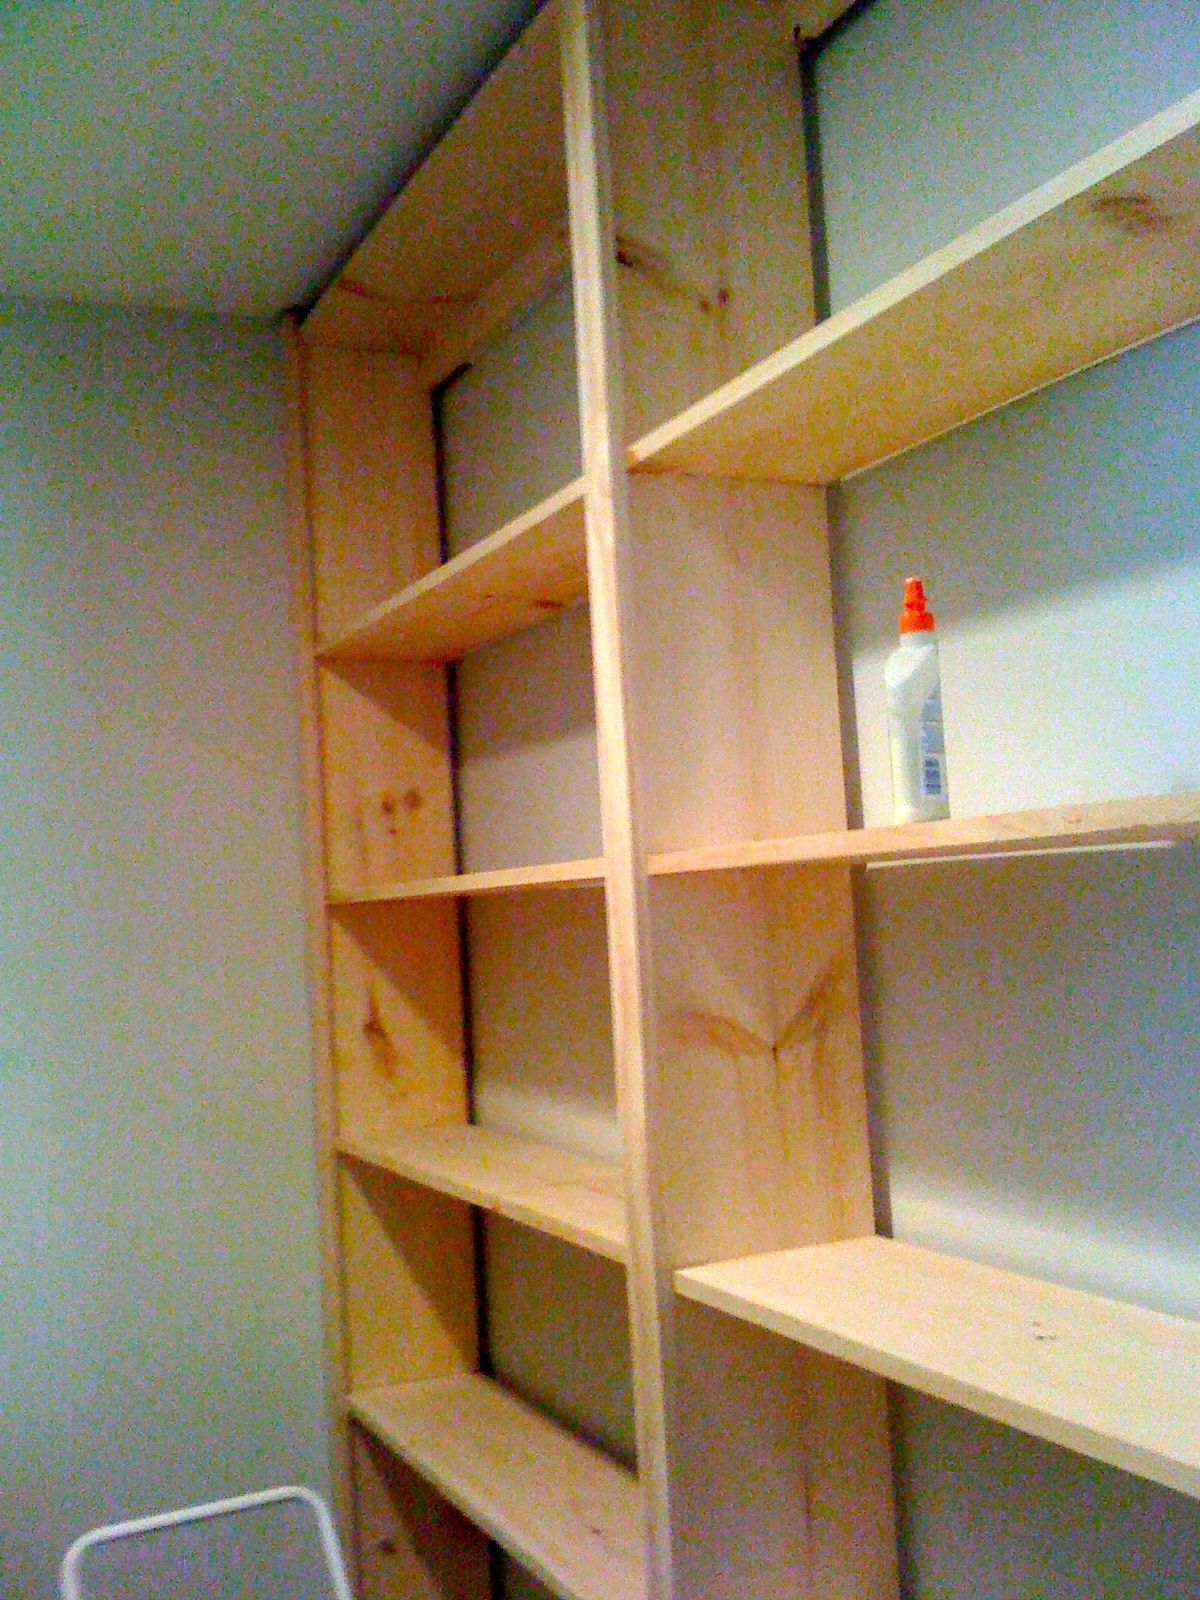 Deux Maison: Inspired To Build! Diy Built In Bookcase! Inside Recent Build Bookcases Wall (View 4 of 15)